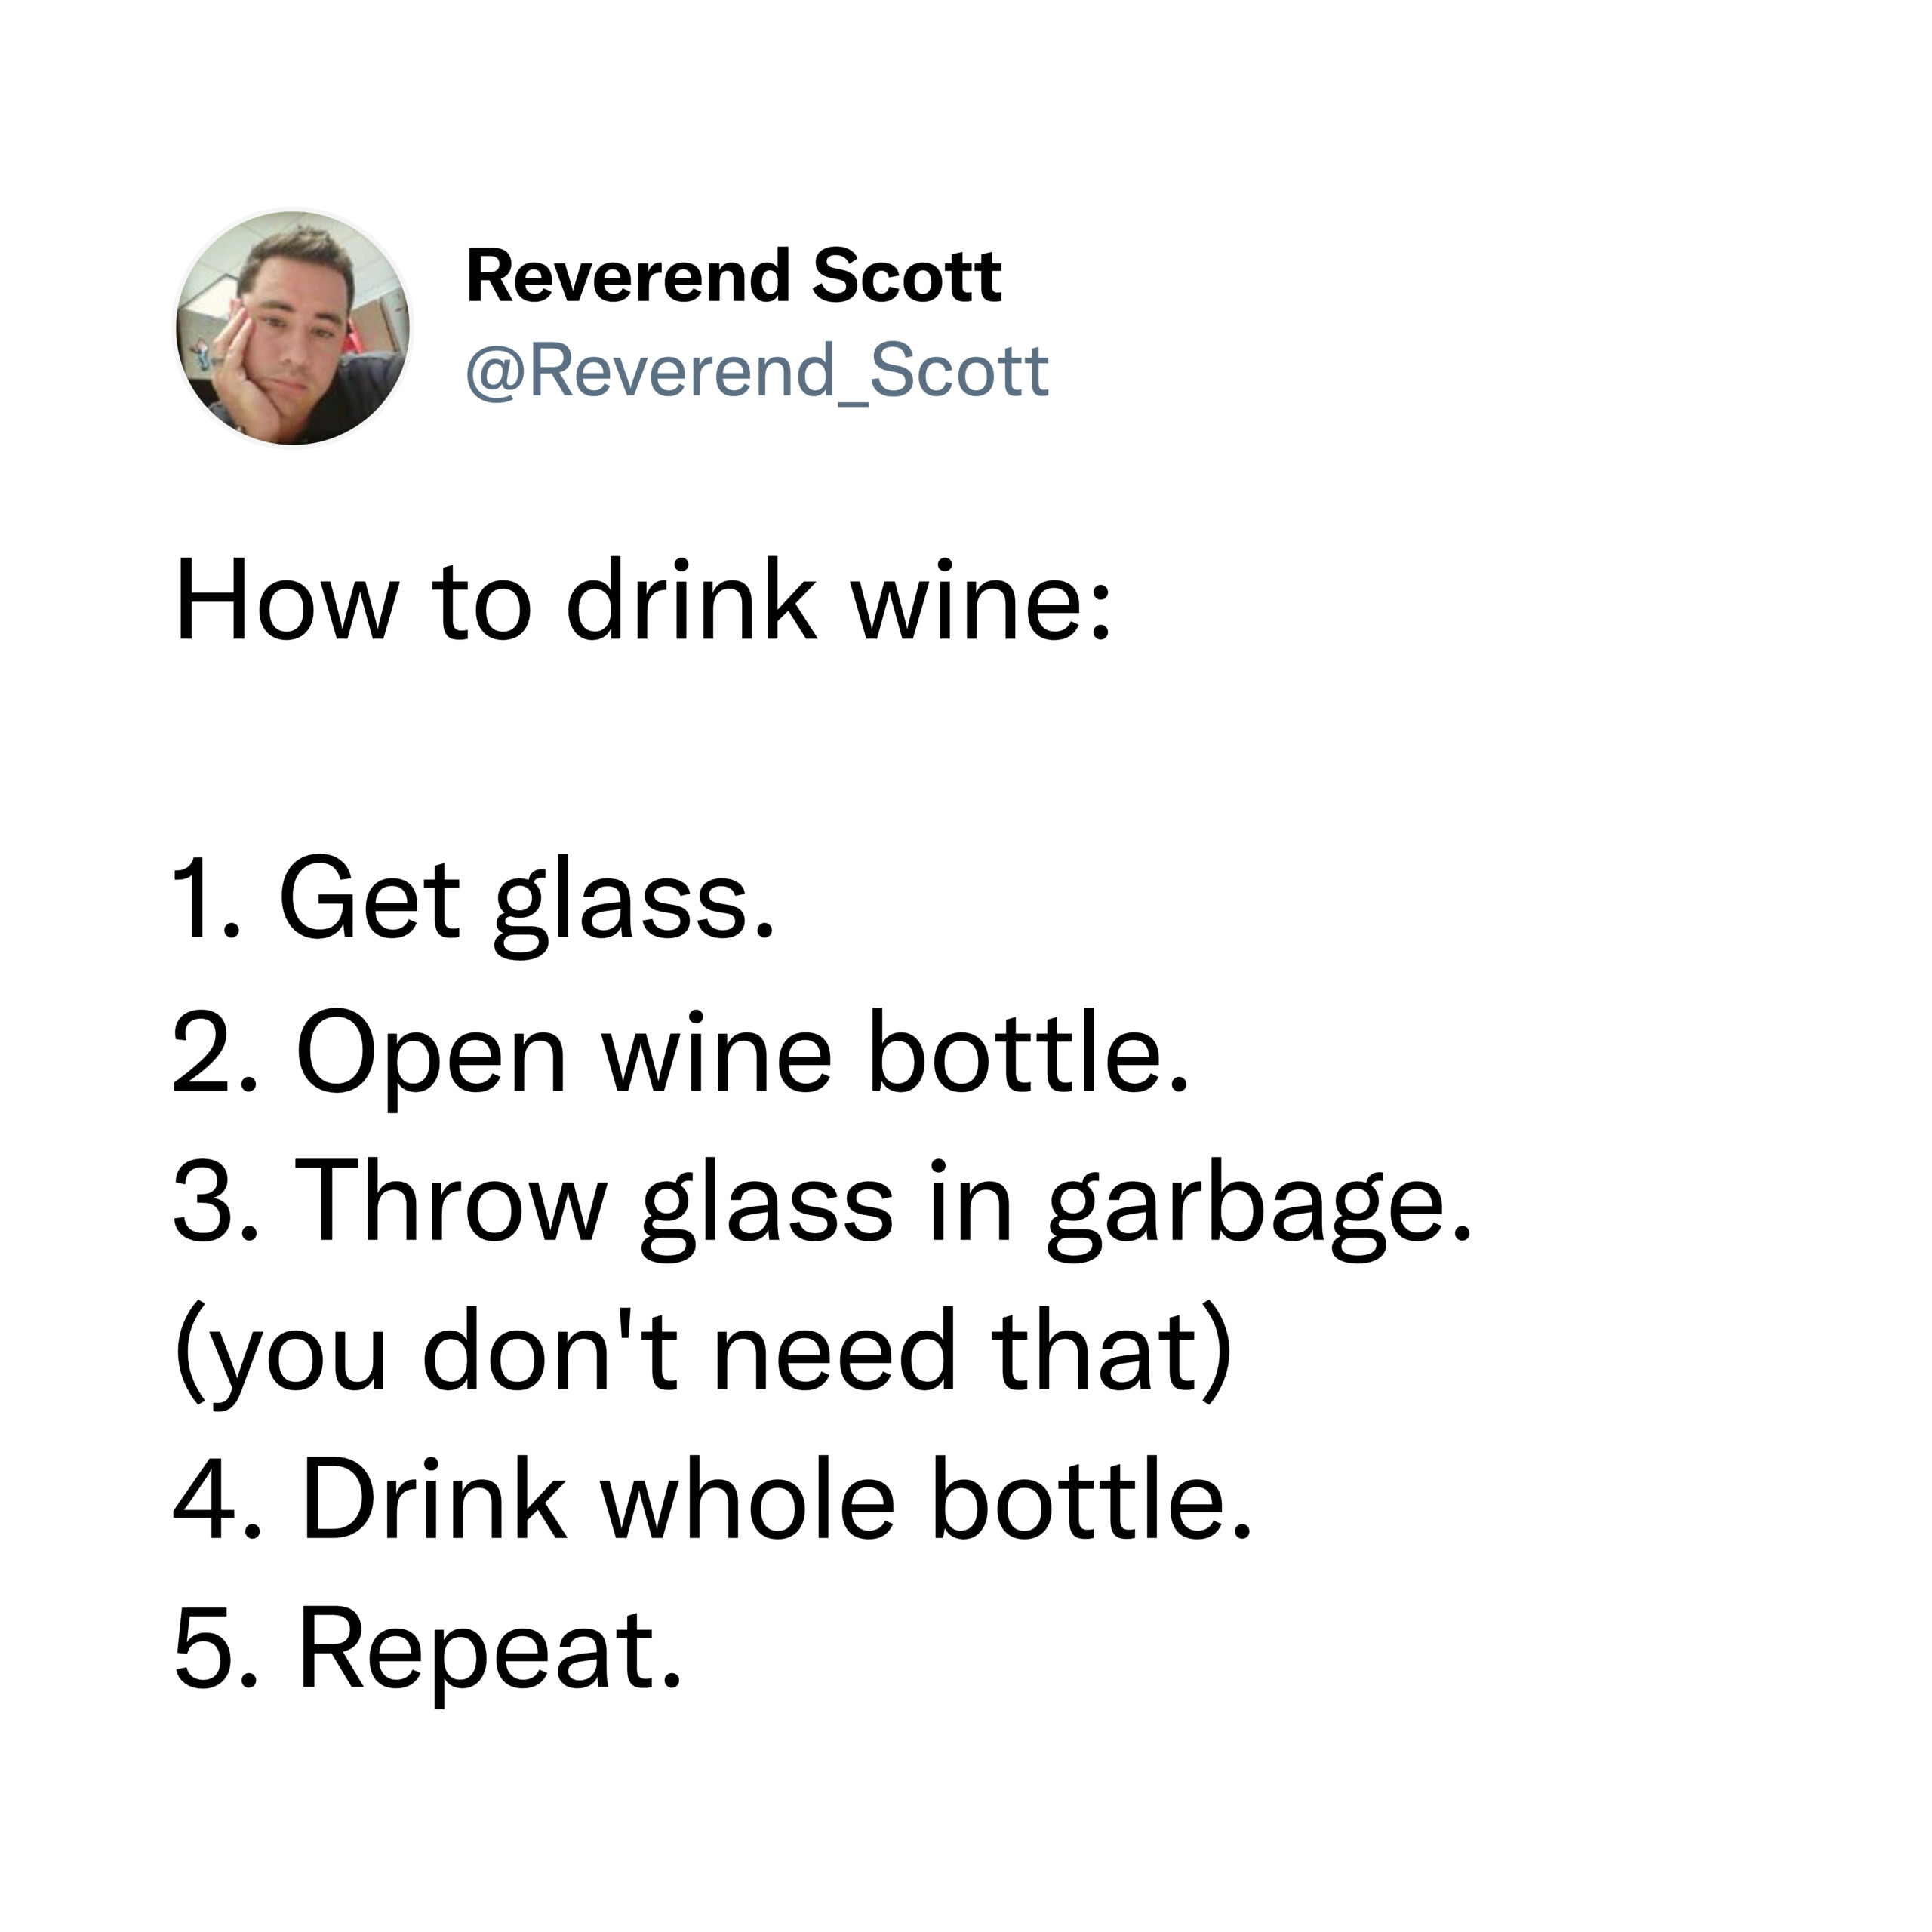 How to drink wine: 1. Get glass. 2. Open wine bottle. 3. Throw glass in garbage. (you don't need that) 4. Drink whole bottle. 5. Repeat.